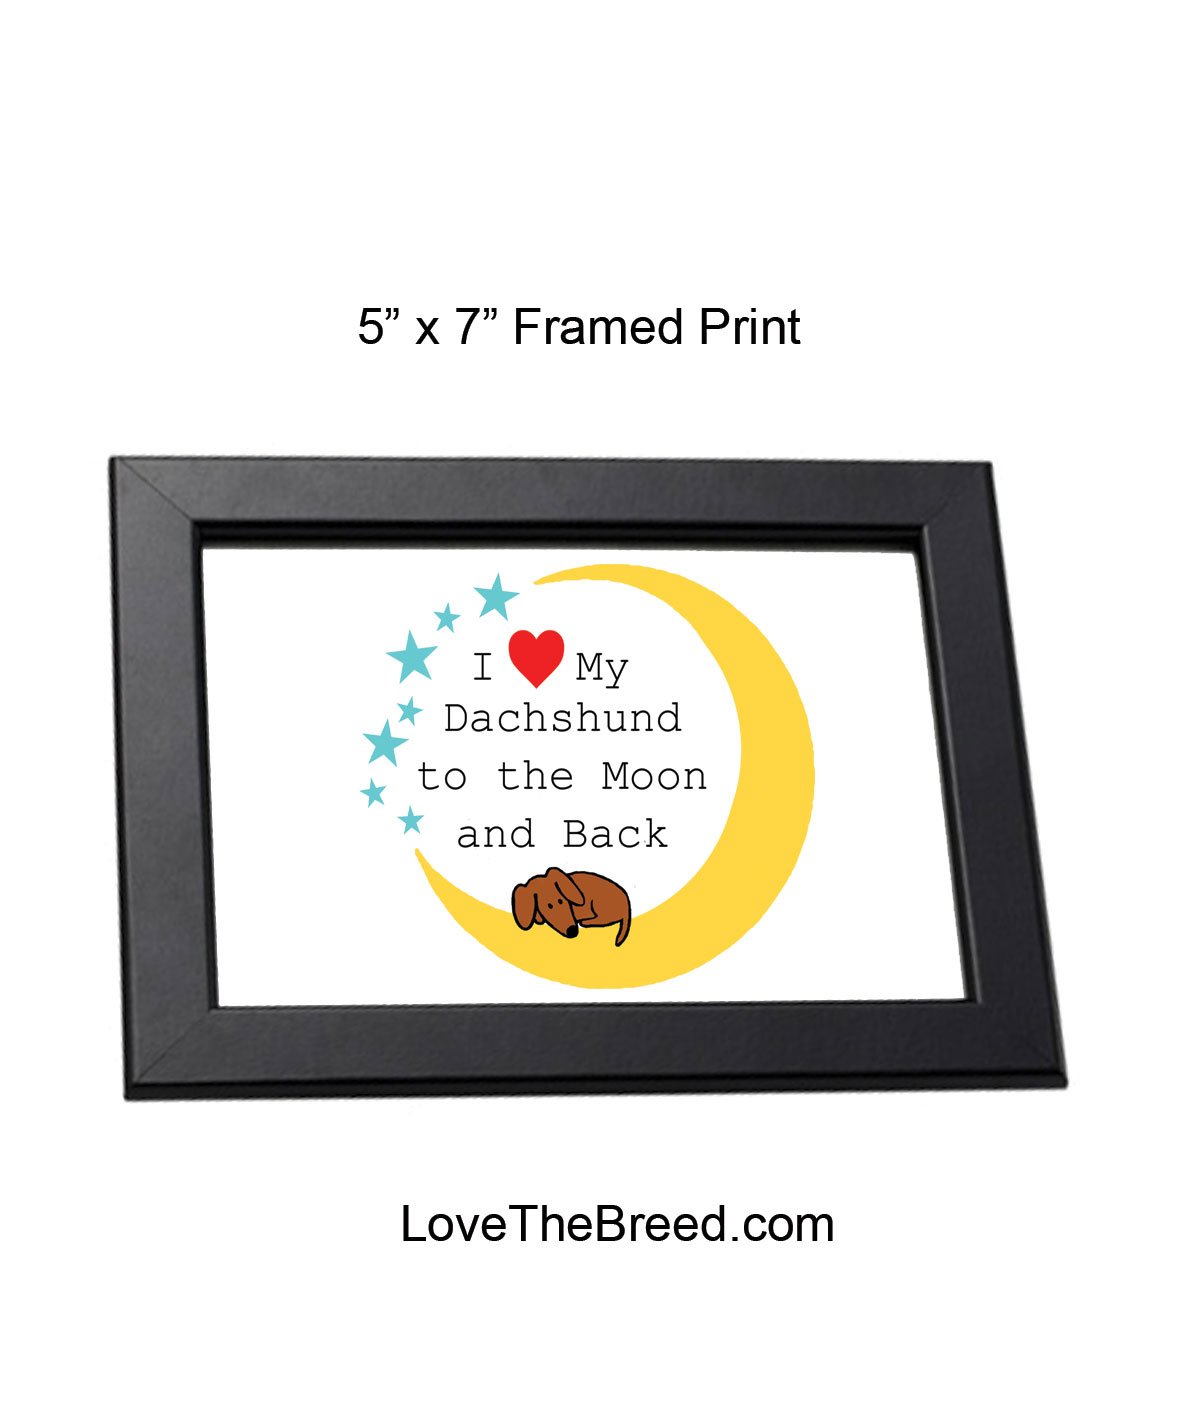 I Love My Dachshund to the Moon and Back Framed Print 5 x 7